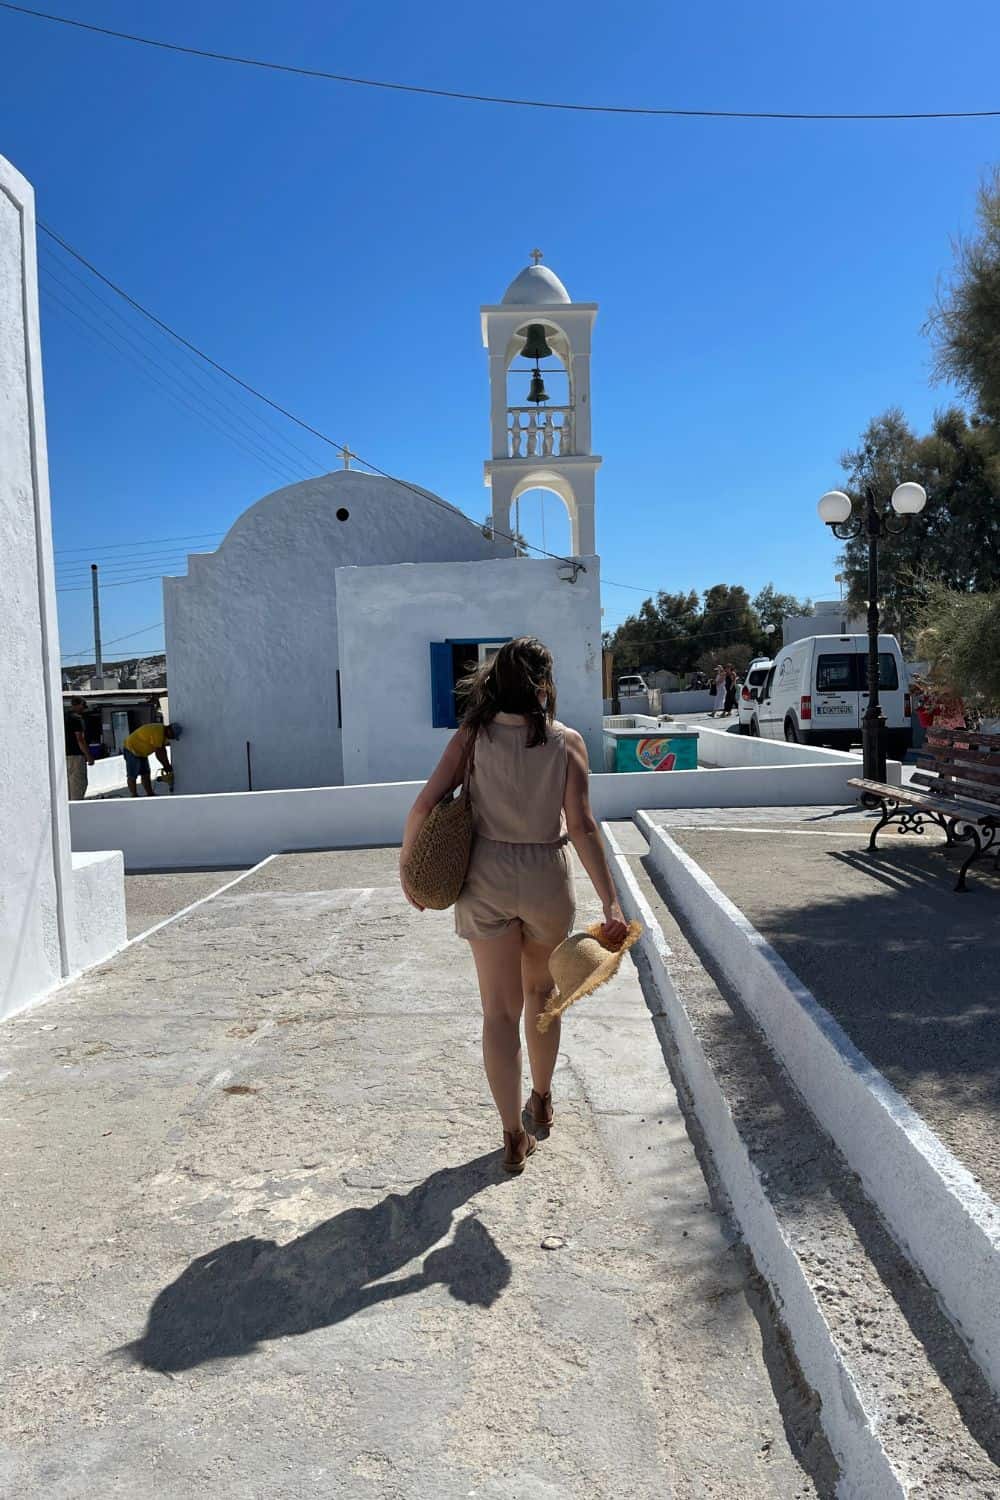 A woman walking towards a traditional Greek church with a bell tower, on a sunny day in Milos